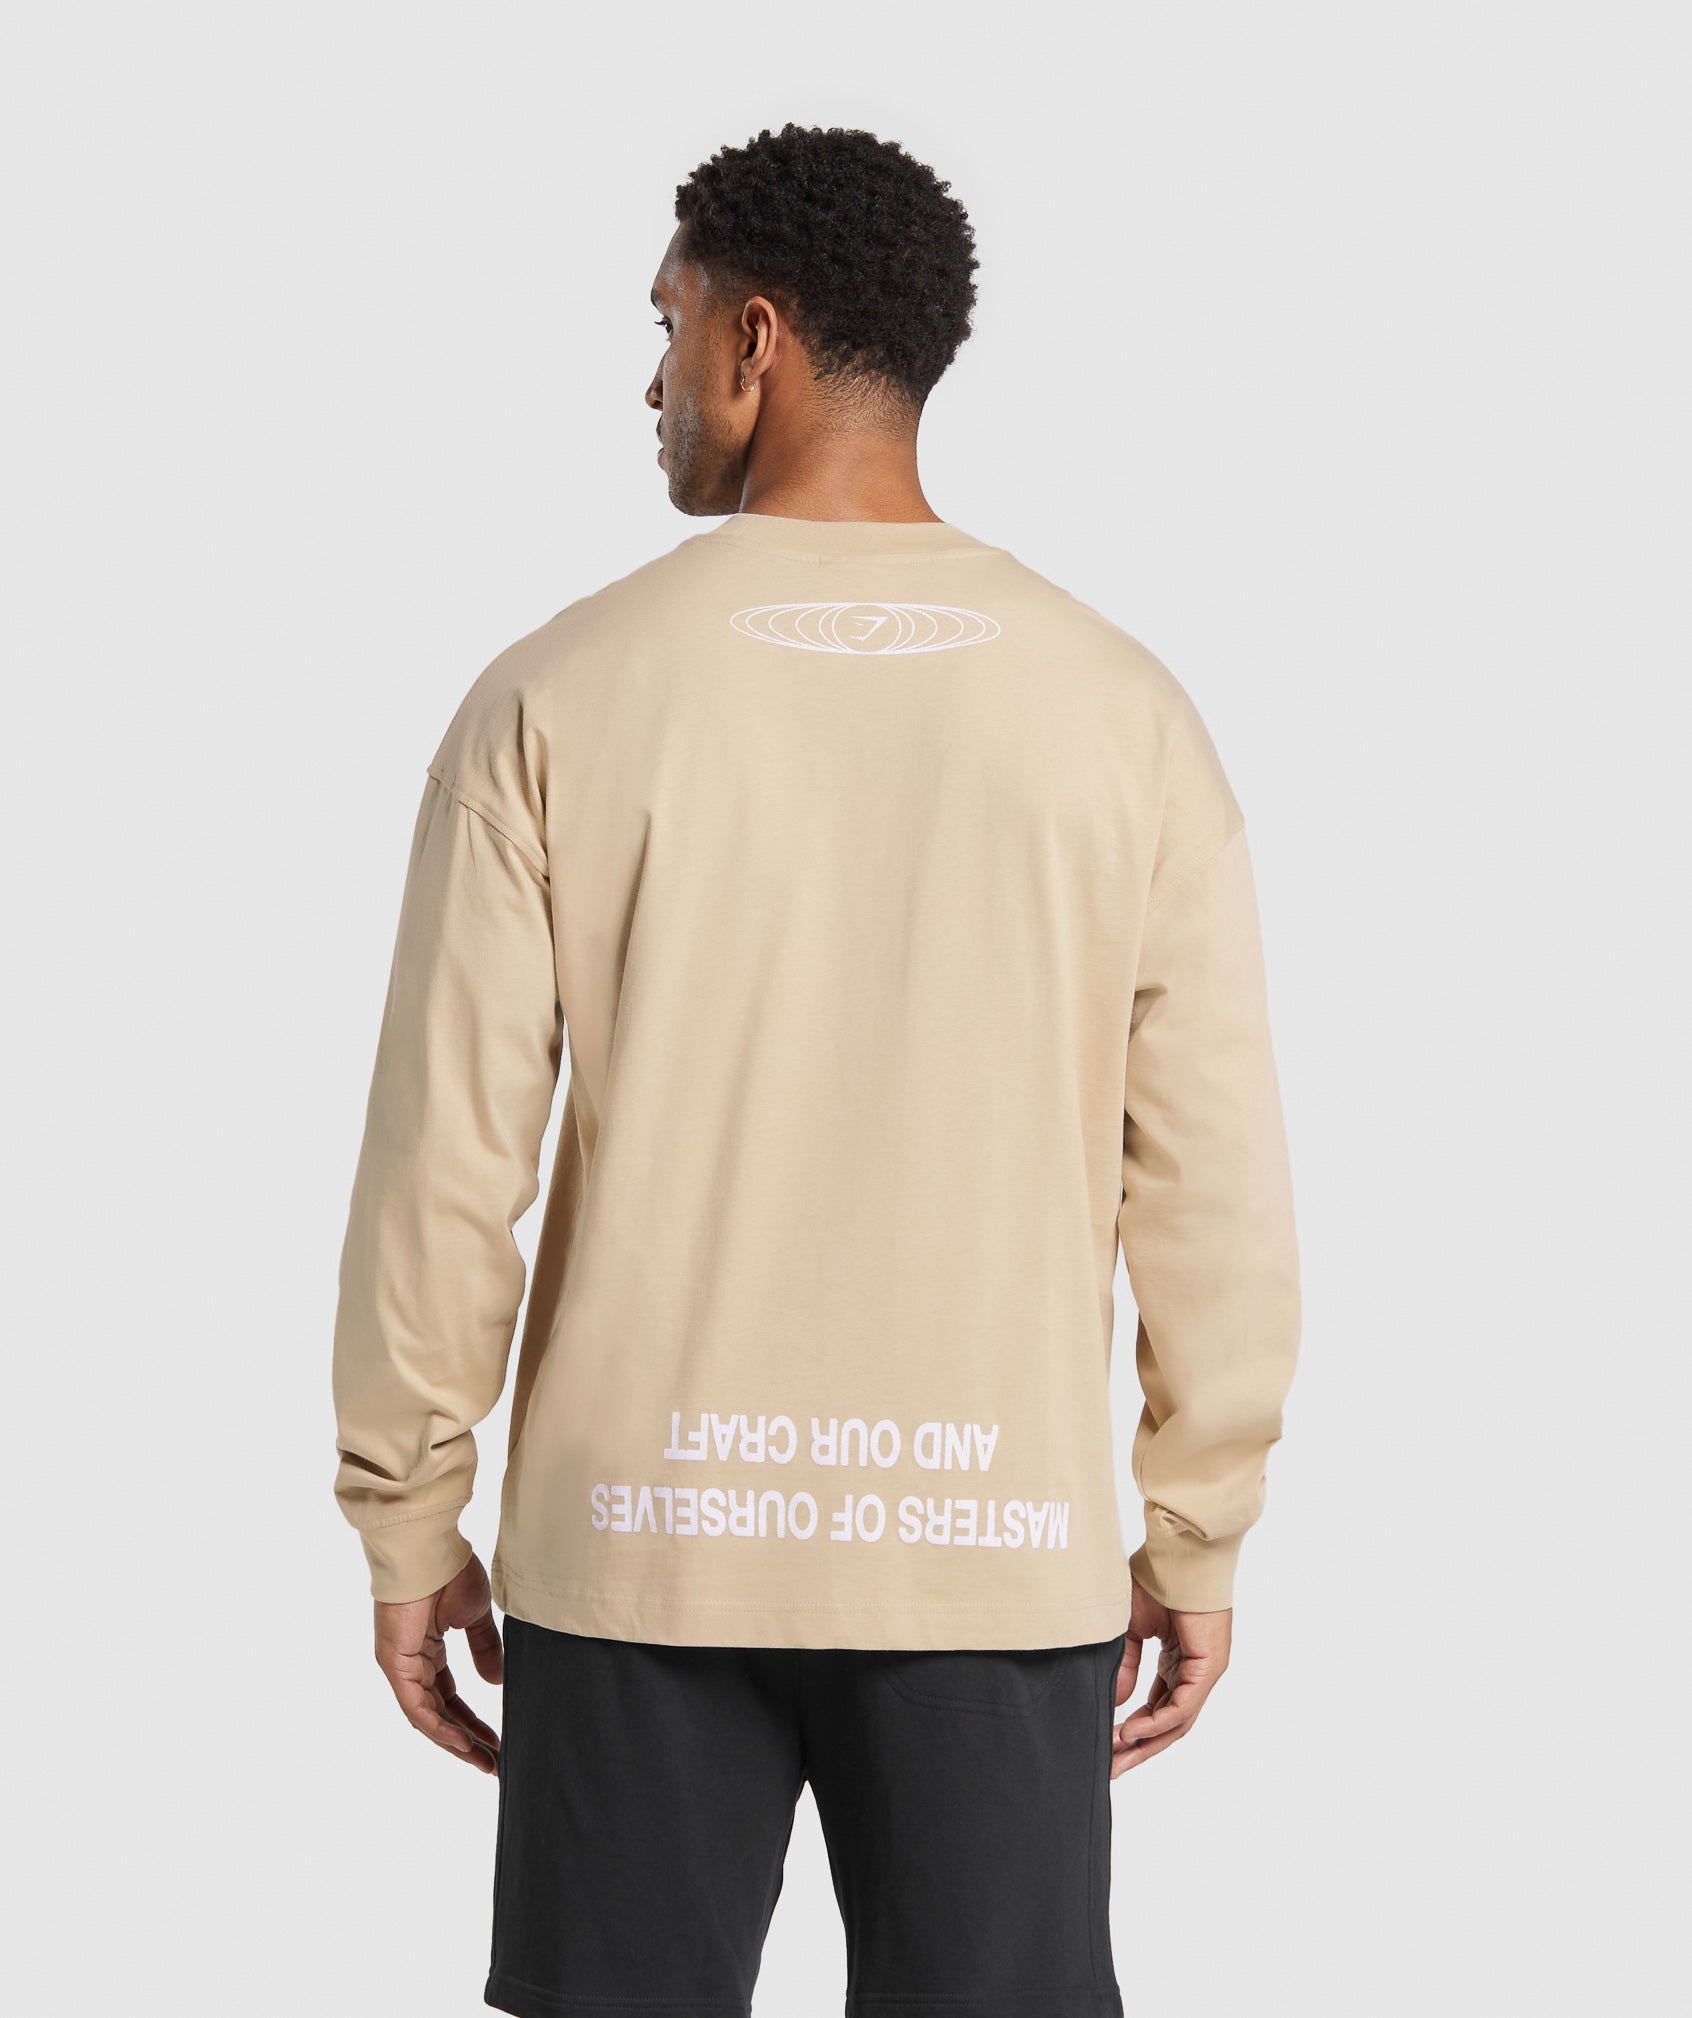 Masters of Our Craft Long Sleeve T-Shirt in Vanilla Beige - view 2